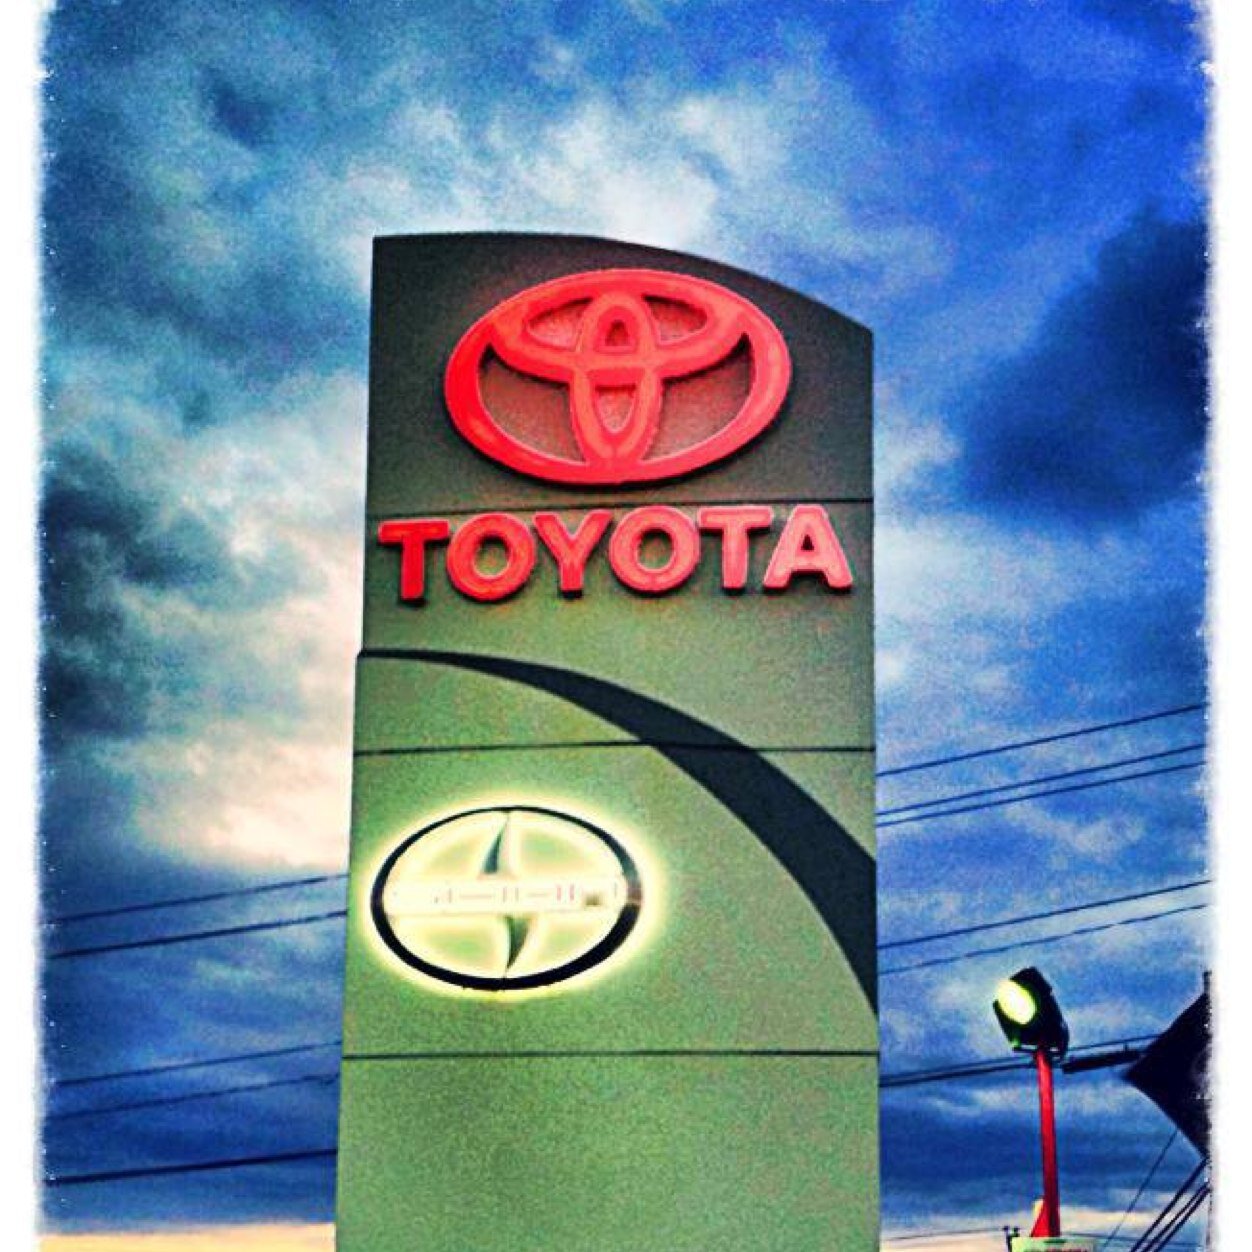 Saint John's only Toyota Dealership. A locally owned family business serving Saint John and Surrounding area for over 20years.